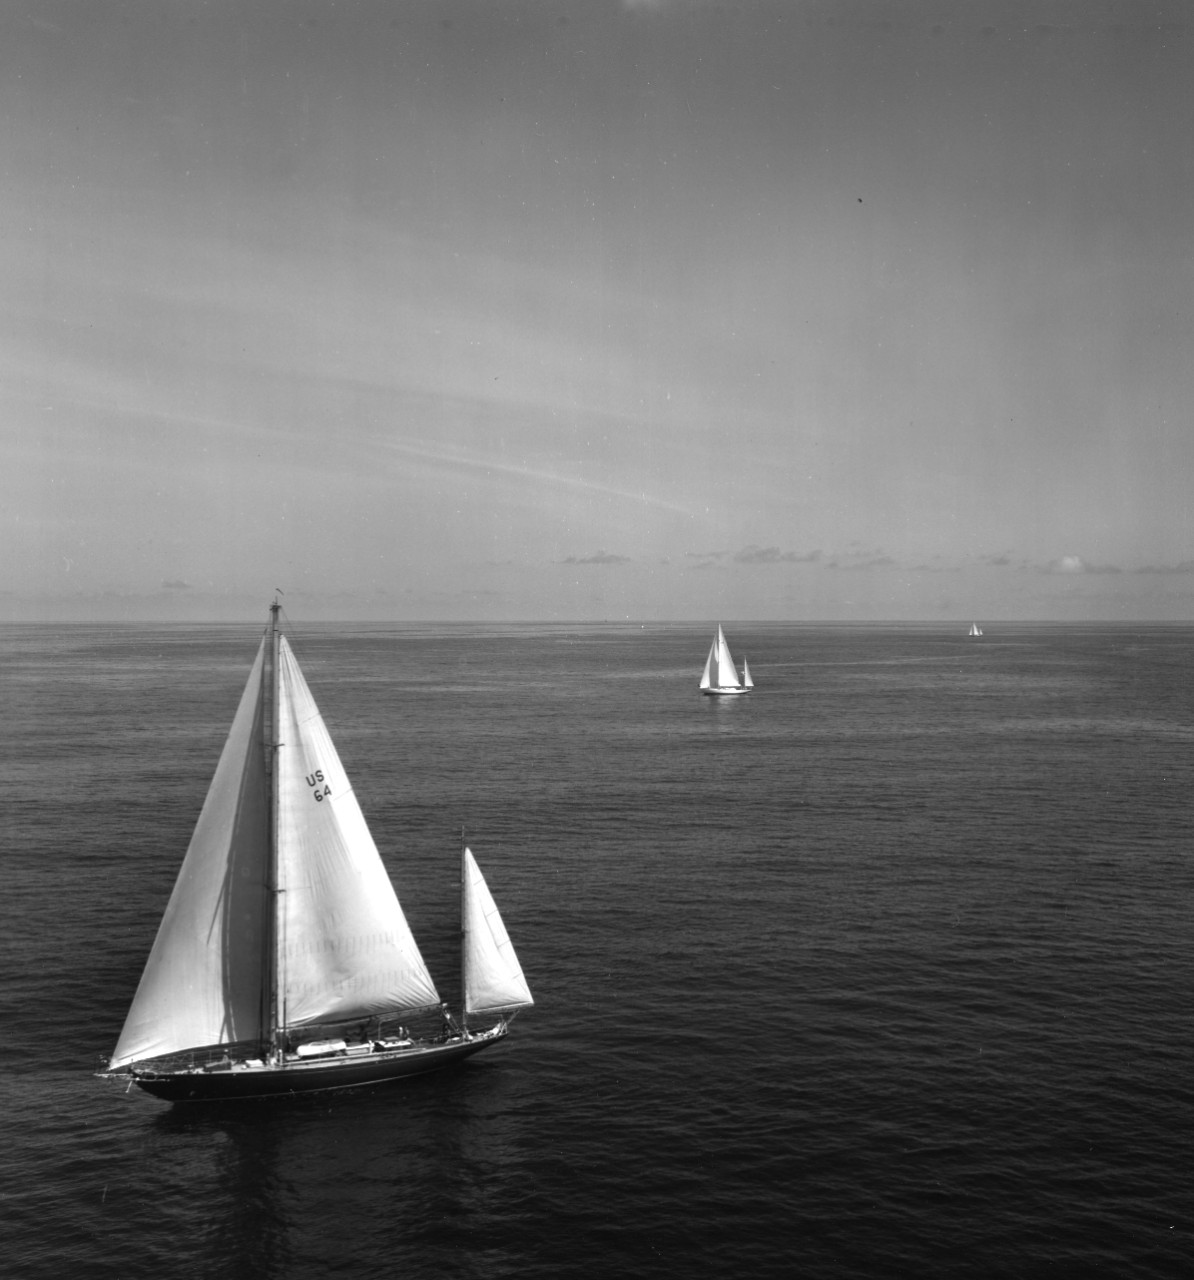 Auxiliary yawl USS Royono (IX-235) under sail during a Bermuda yacht race. Yacht Enchanta can be seen in in center background.